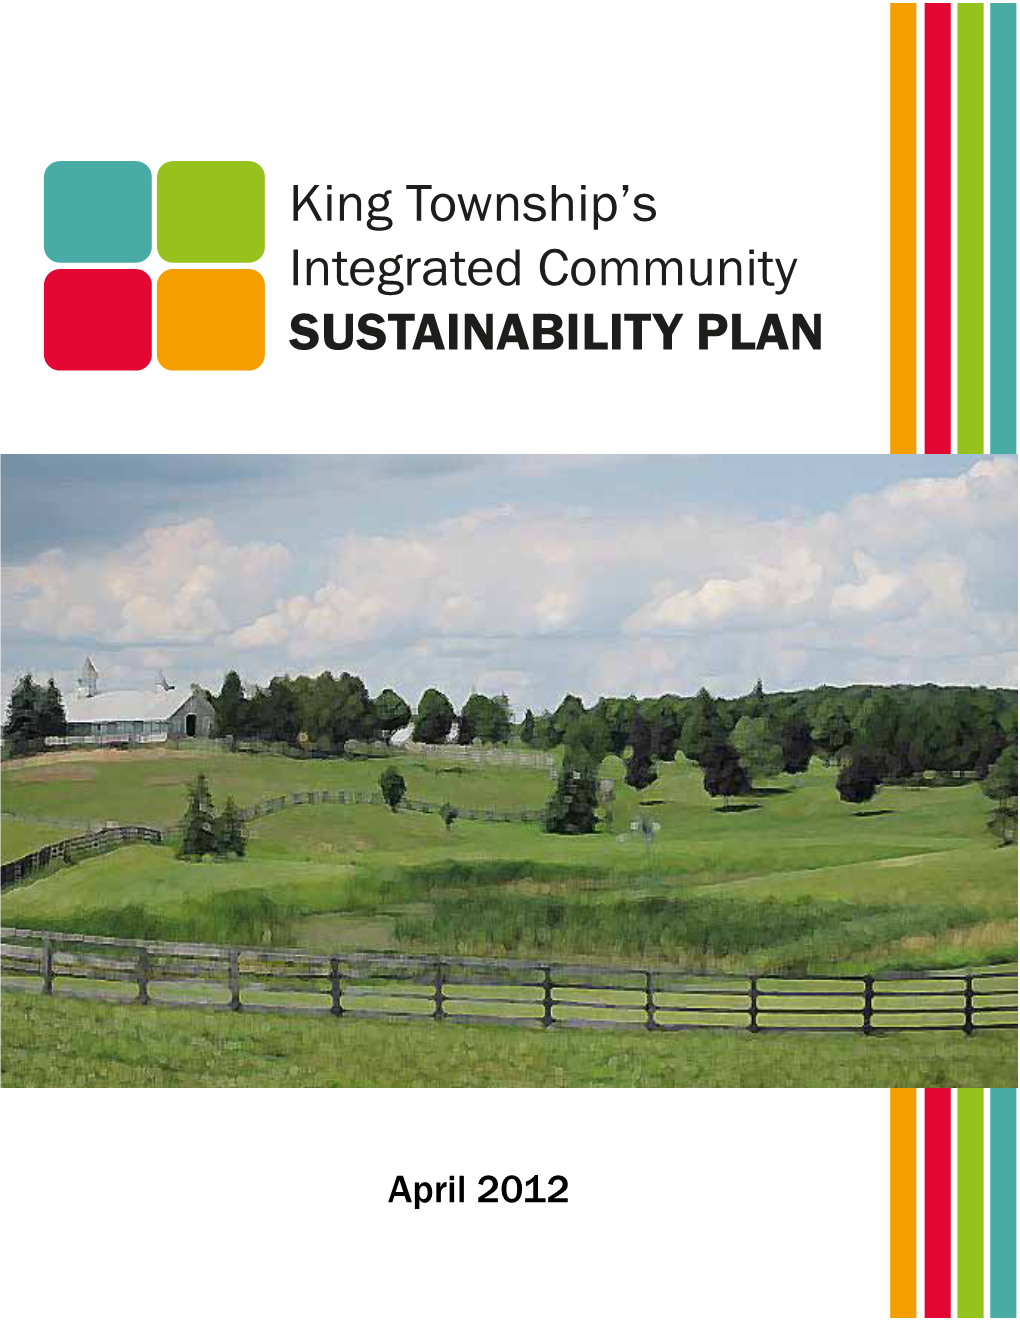 King Township's Integrated Community